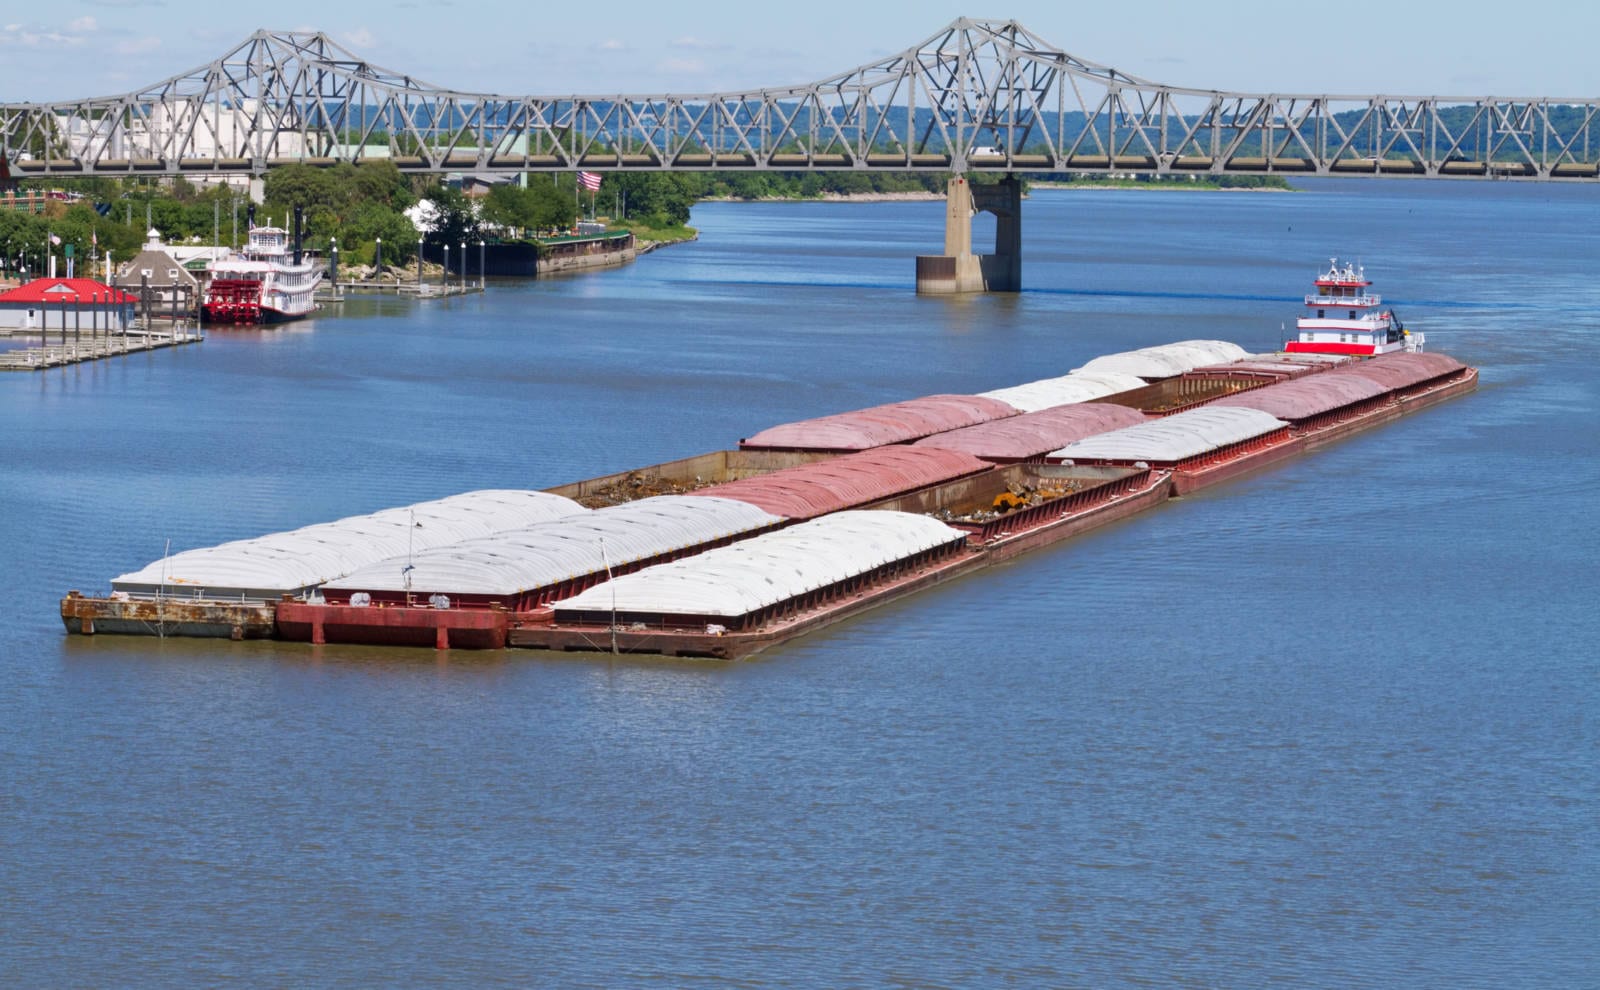 Barge Rates Muted - U.S. Soy